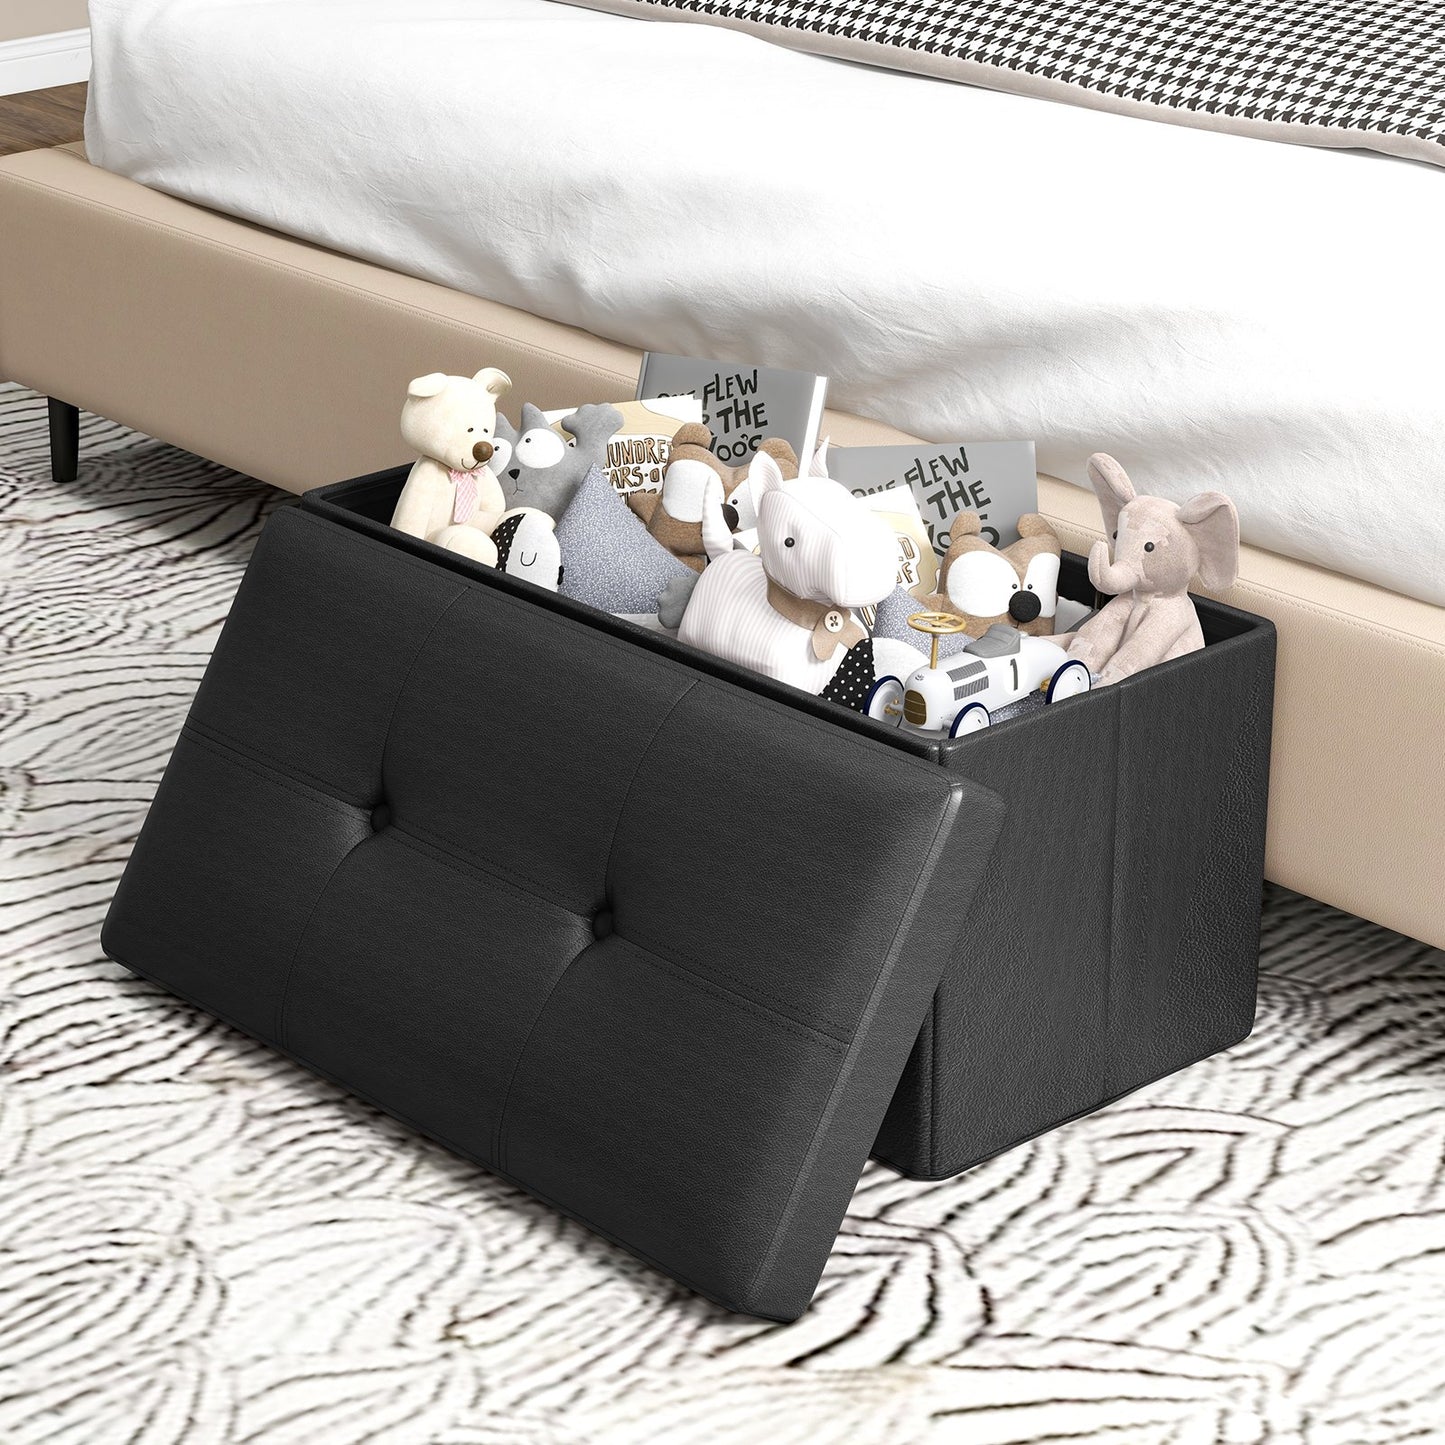 Upholstered Rectangle Footstool with PVC Leather Surface and Storage Function, Black